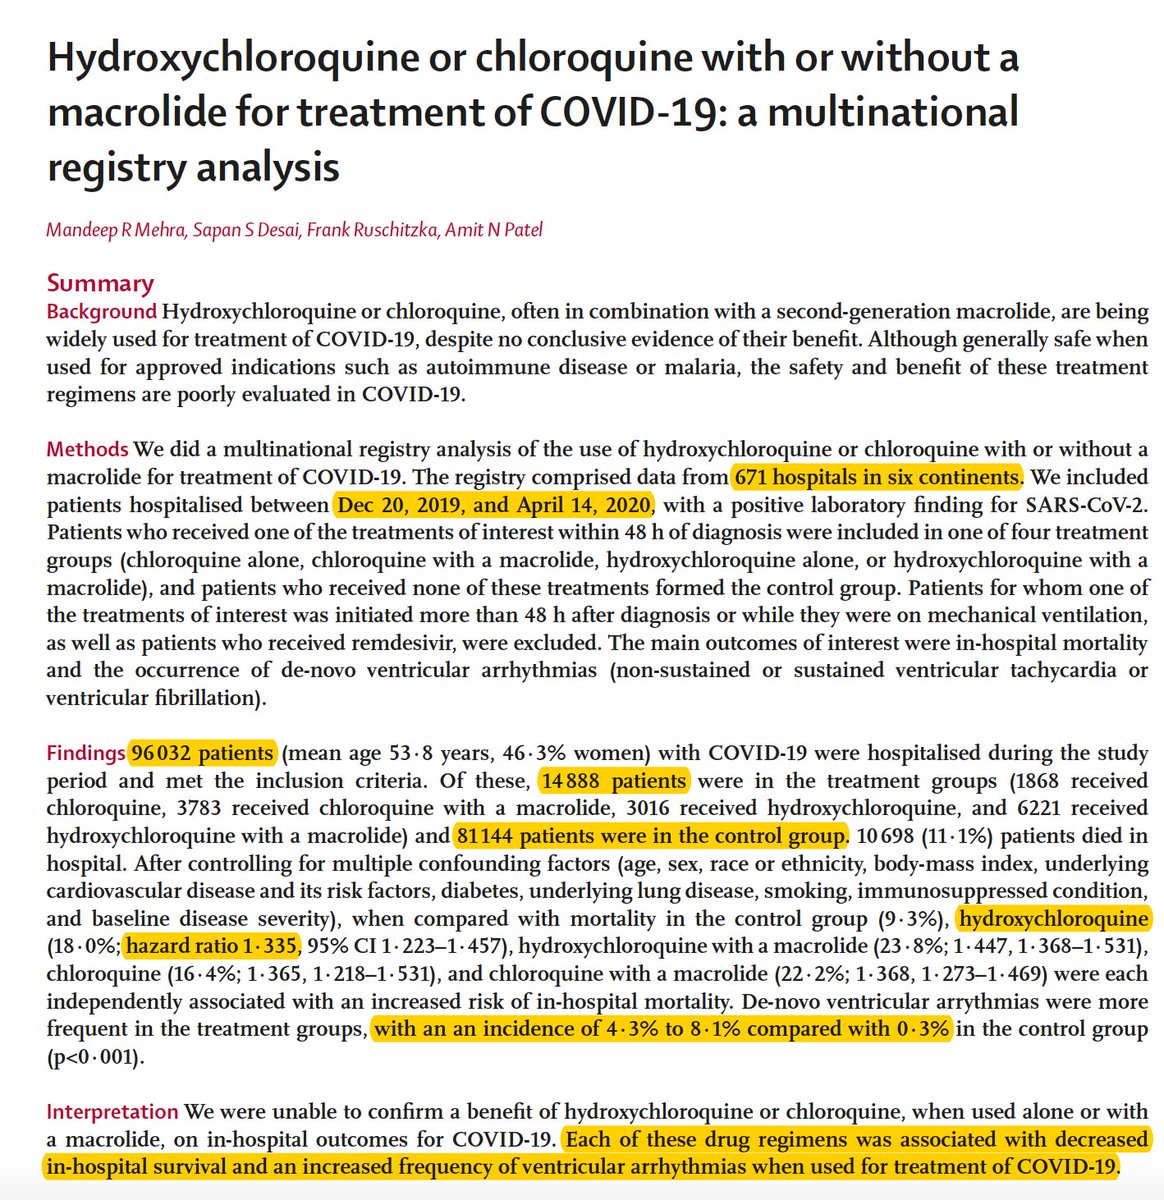 Just published  @TheLancet The largest study of hydroxychloroquine shows a significant increase in death (~35%) and >2-fold increase of serious heart arrhythmias. ~96,000 patients, ~15,000 on HCQ or CQ from 671 hospitals, 6 continents.  https://marlin-prod.literatumonline.com/pb-assets/Lancet/pdfs/S0140673620311806.pdf